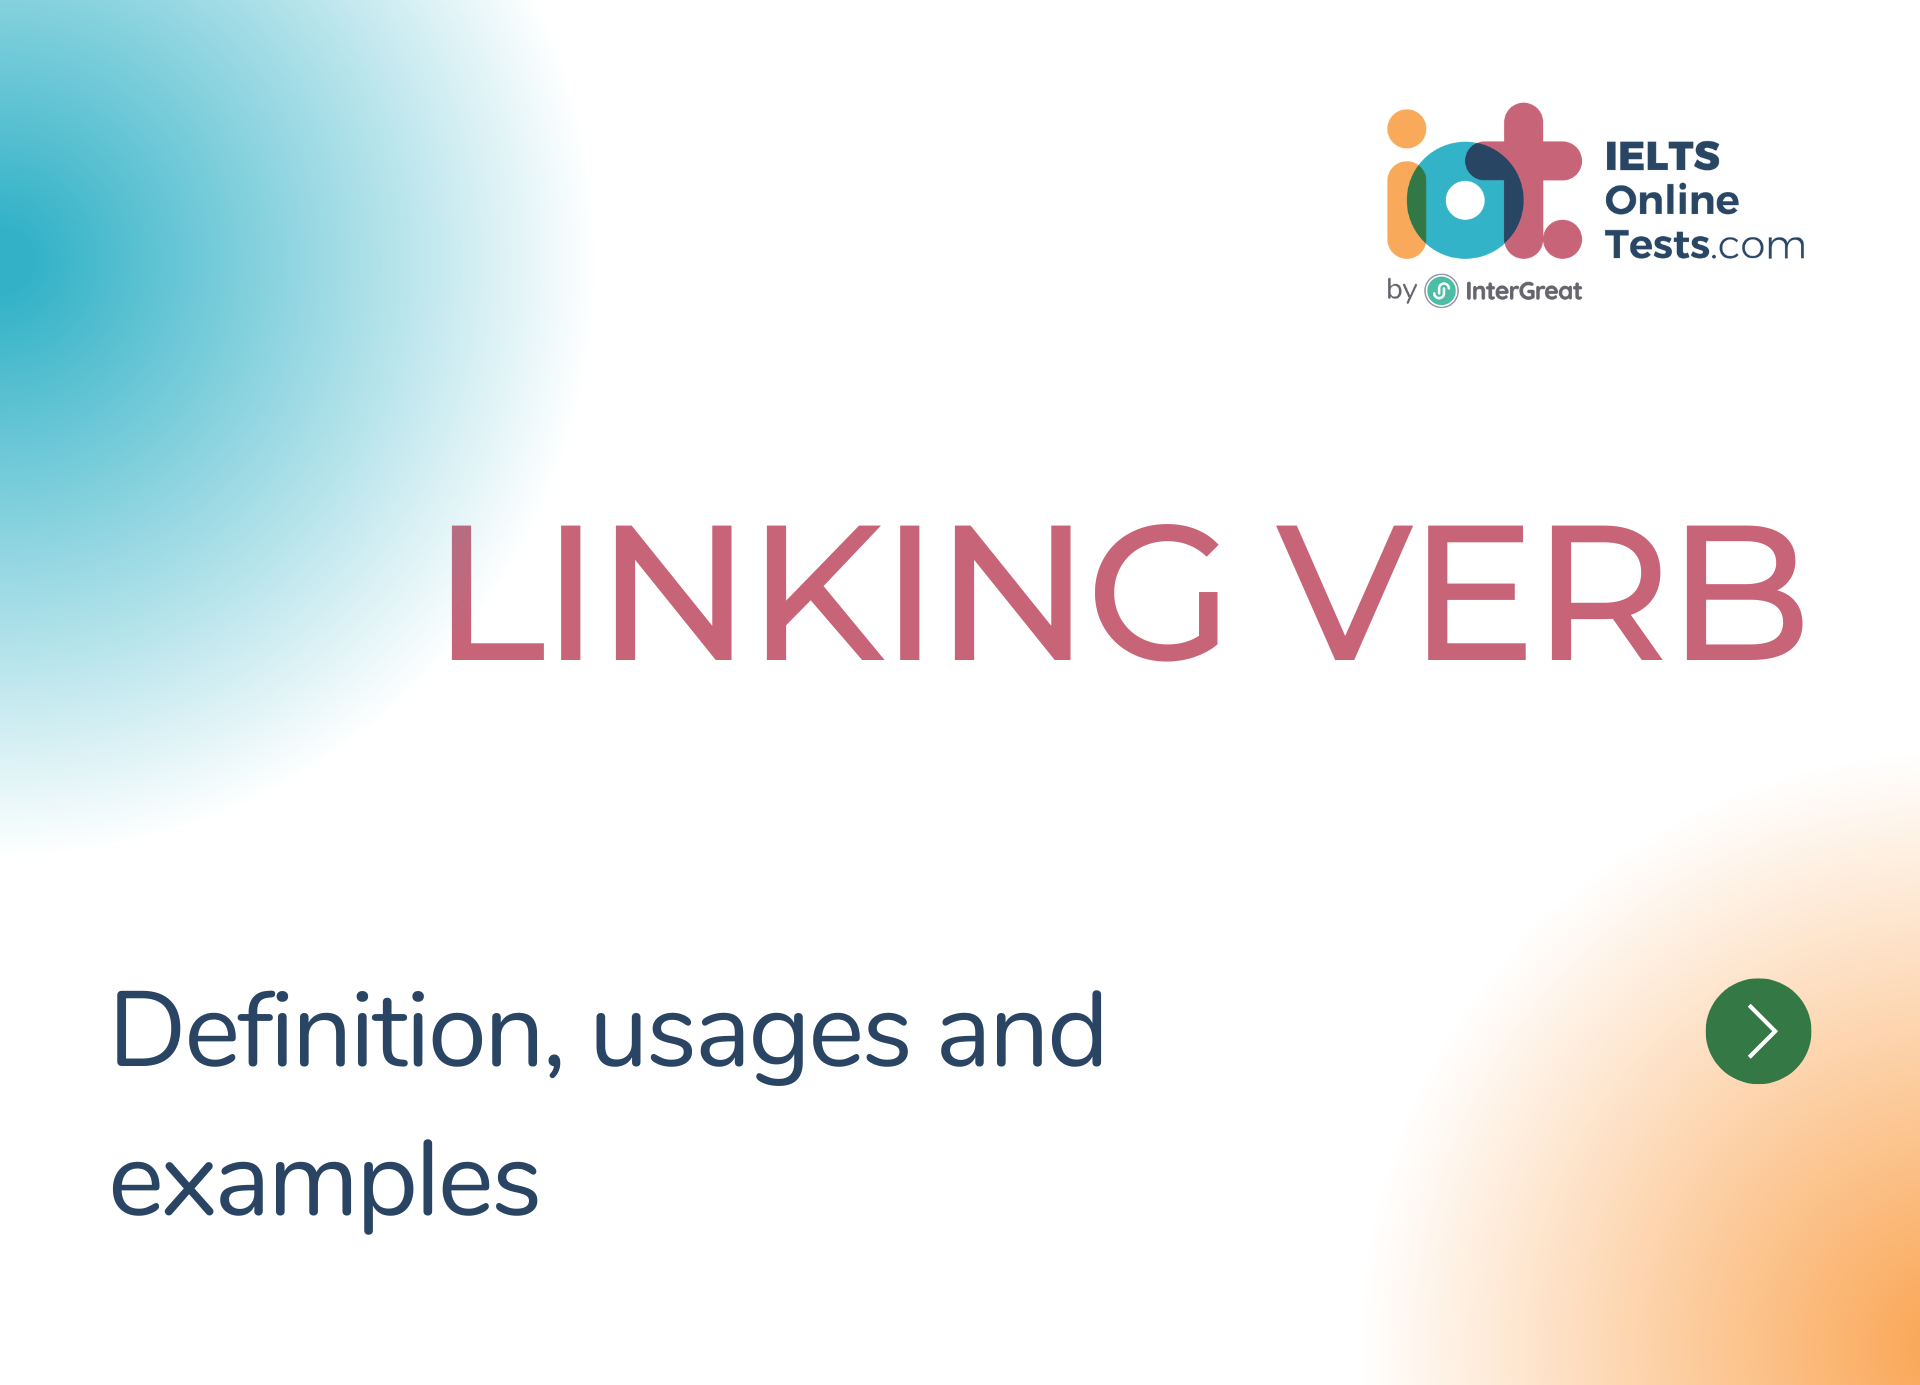 Linking verb definition and examples